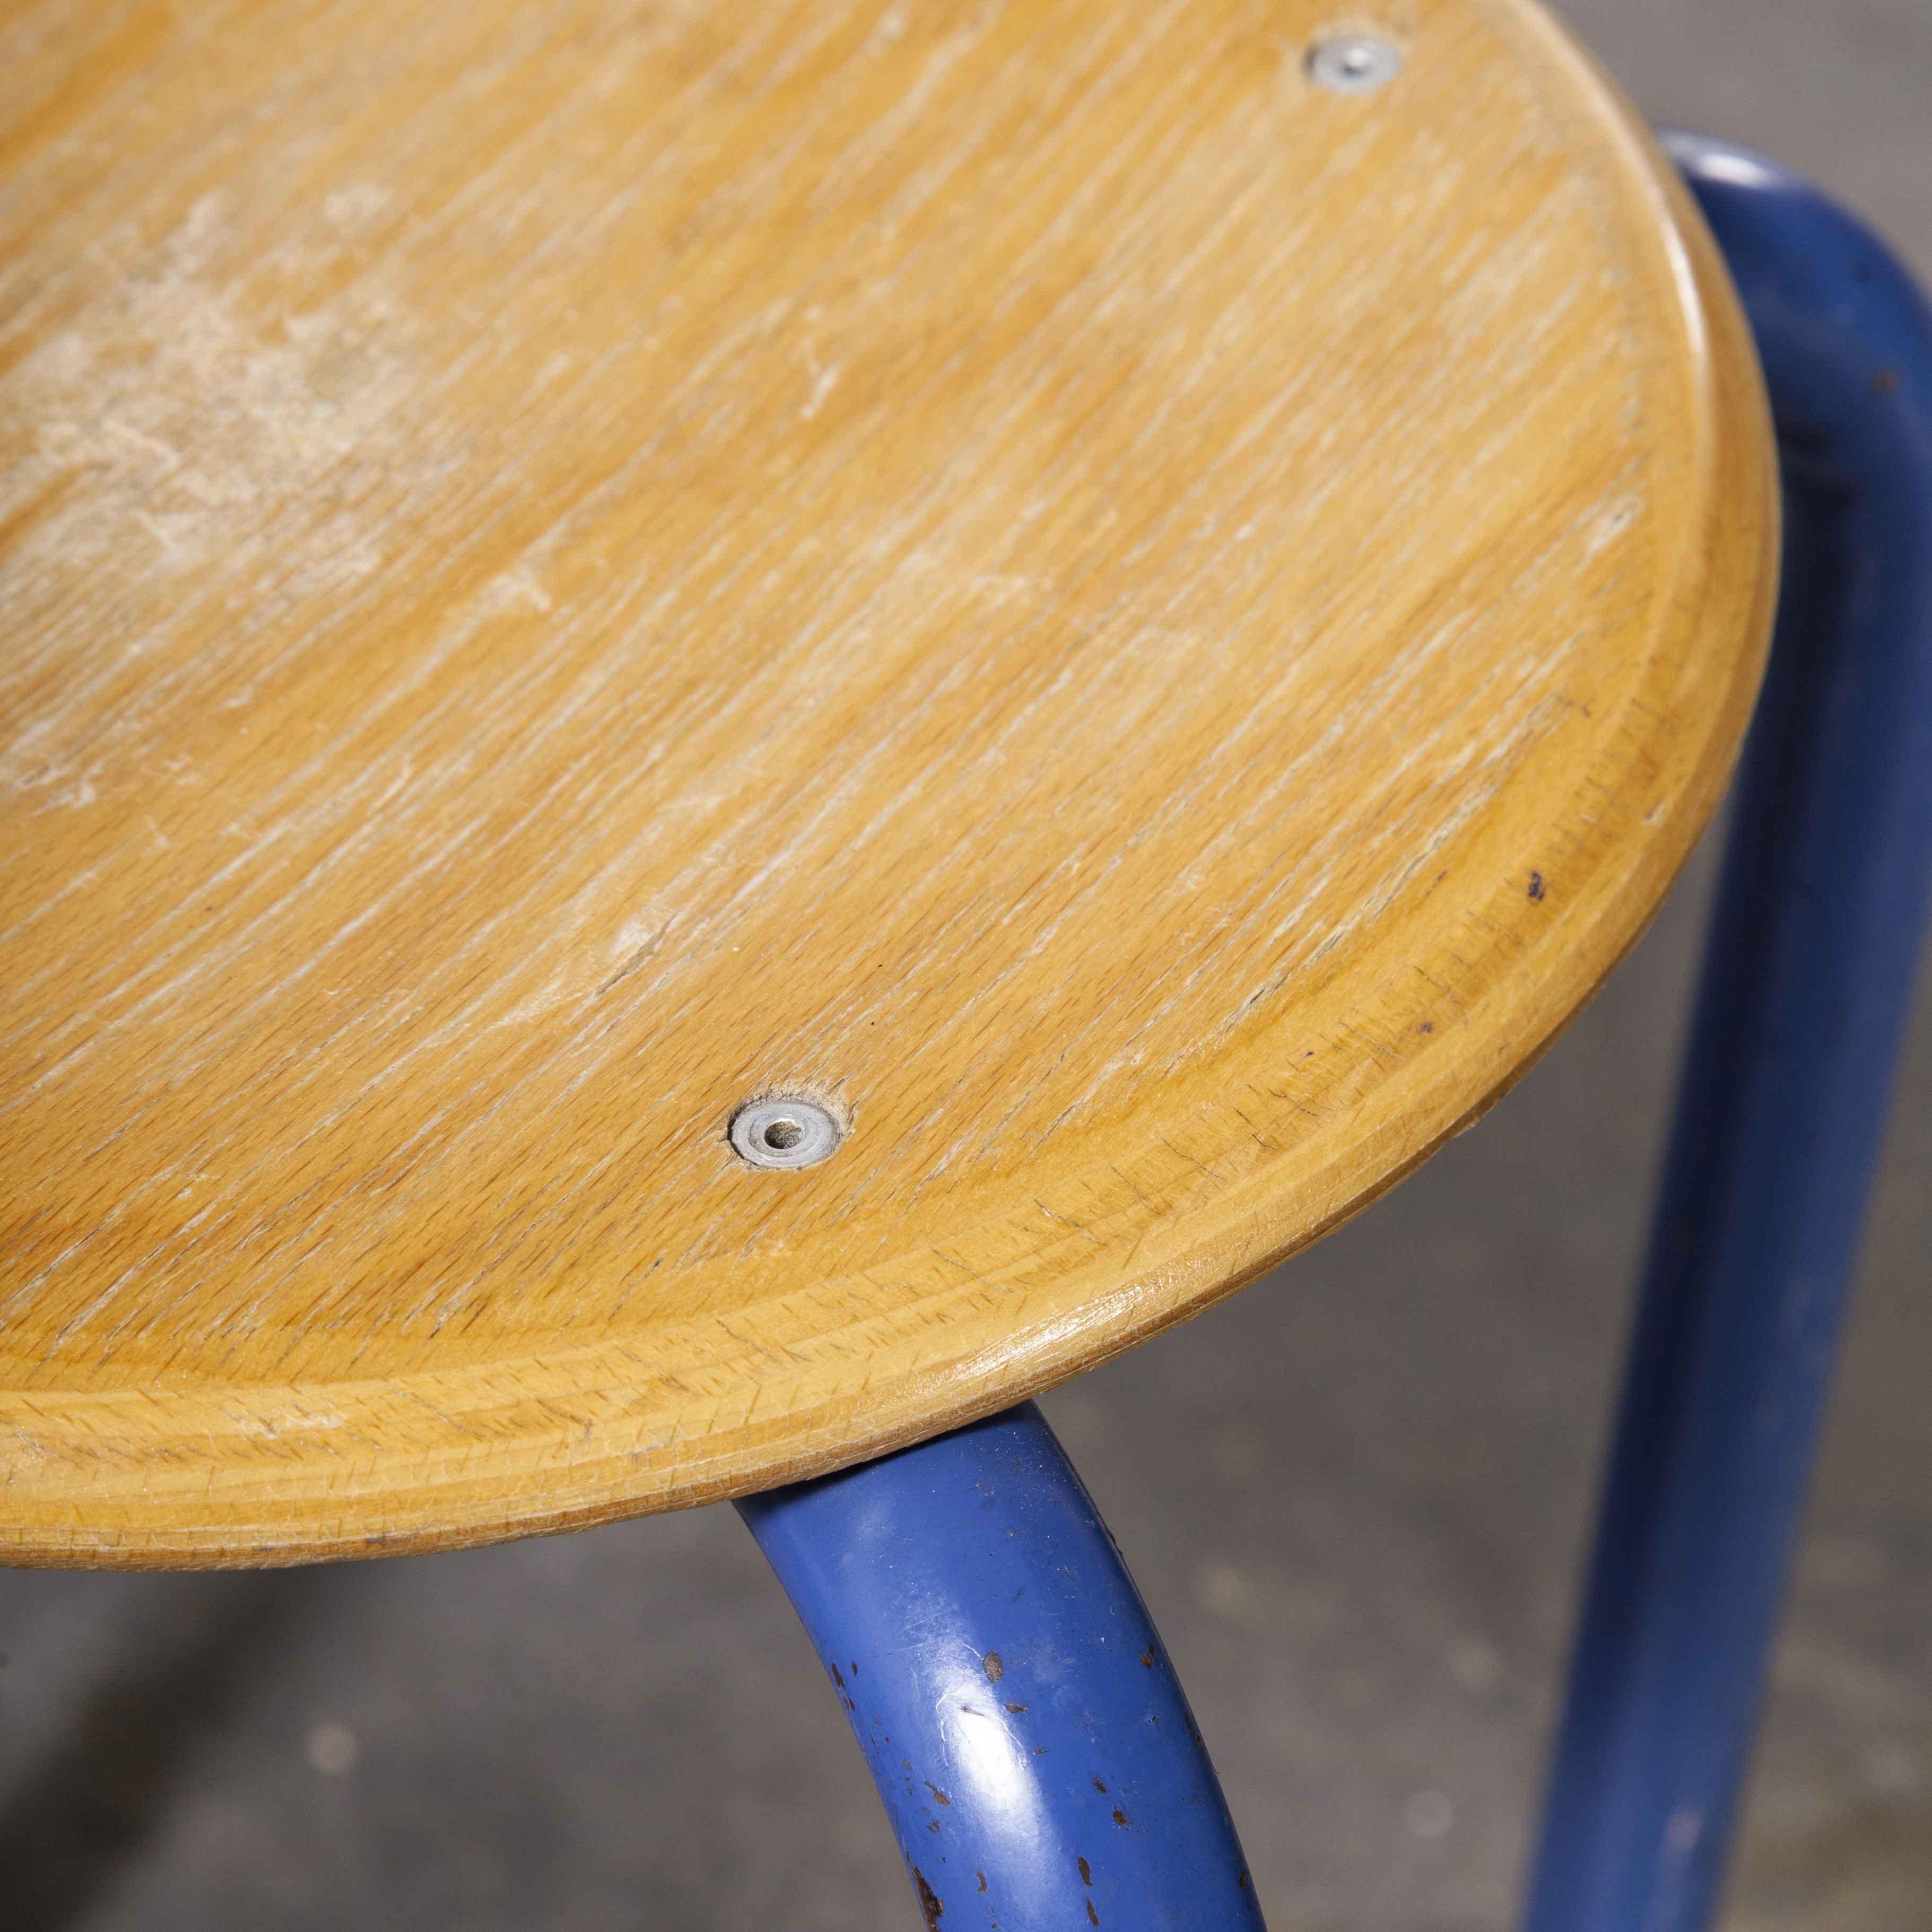 1960’s simple French Stacking School stools – blue – set of eight

1960’s simple French Stacking School stools – blue – set of eight. Classic French school stools, solid beech laminated tops with strong metal bases. Original stools in great